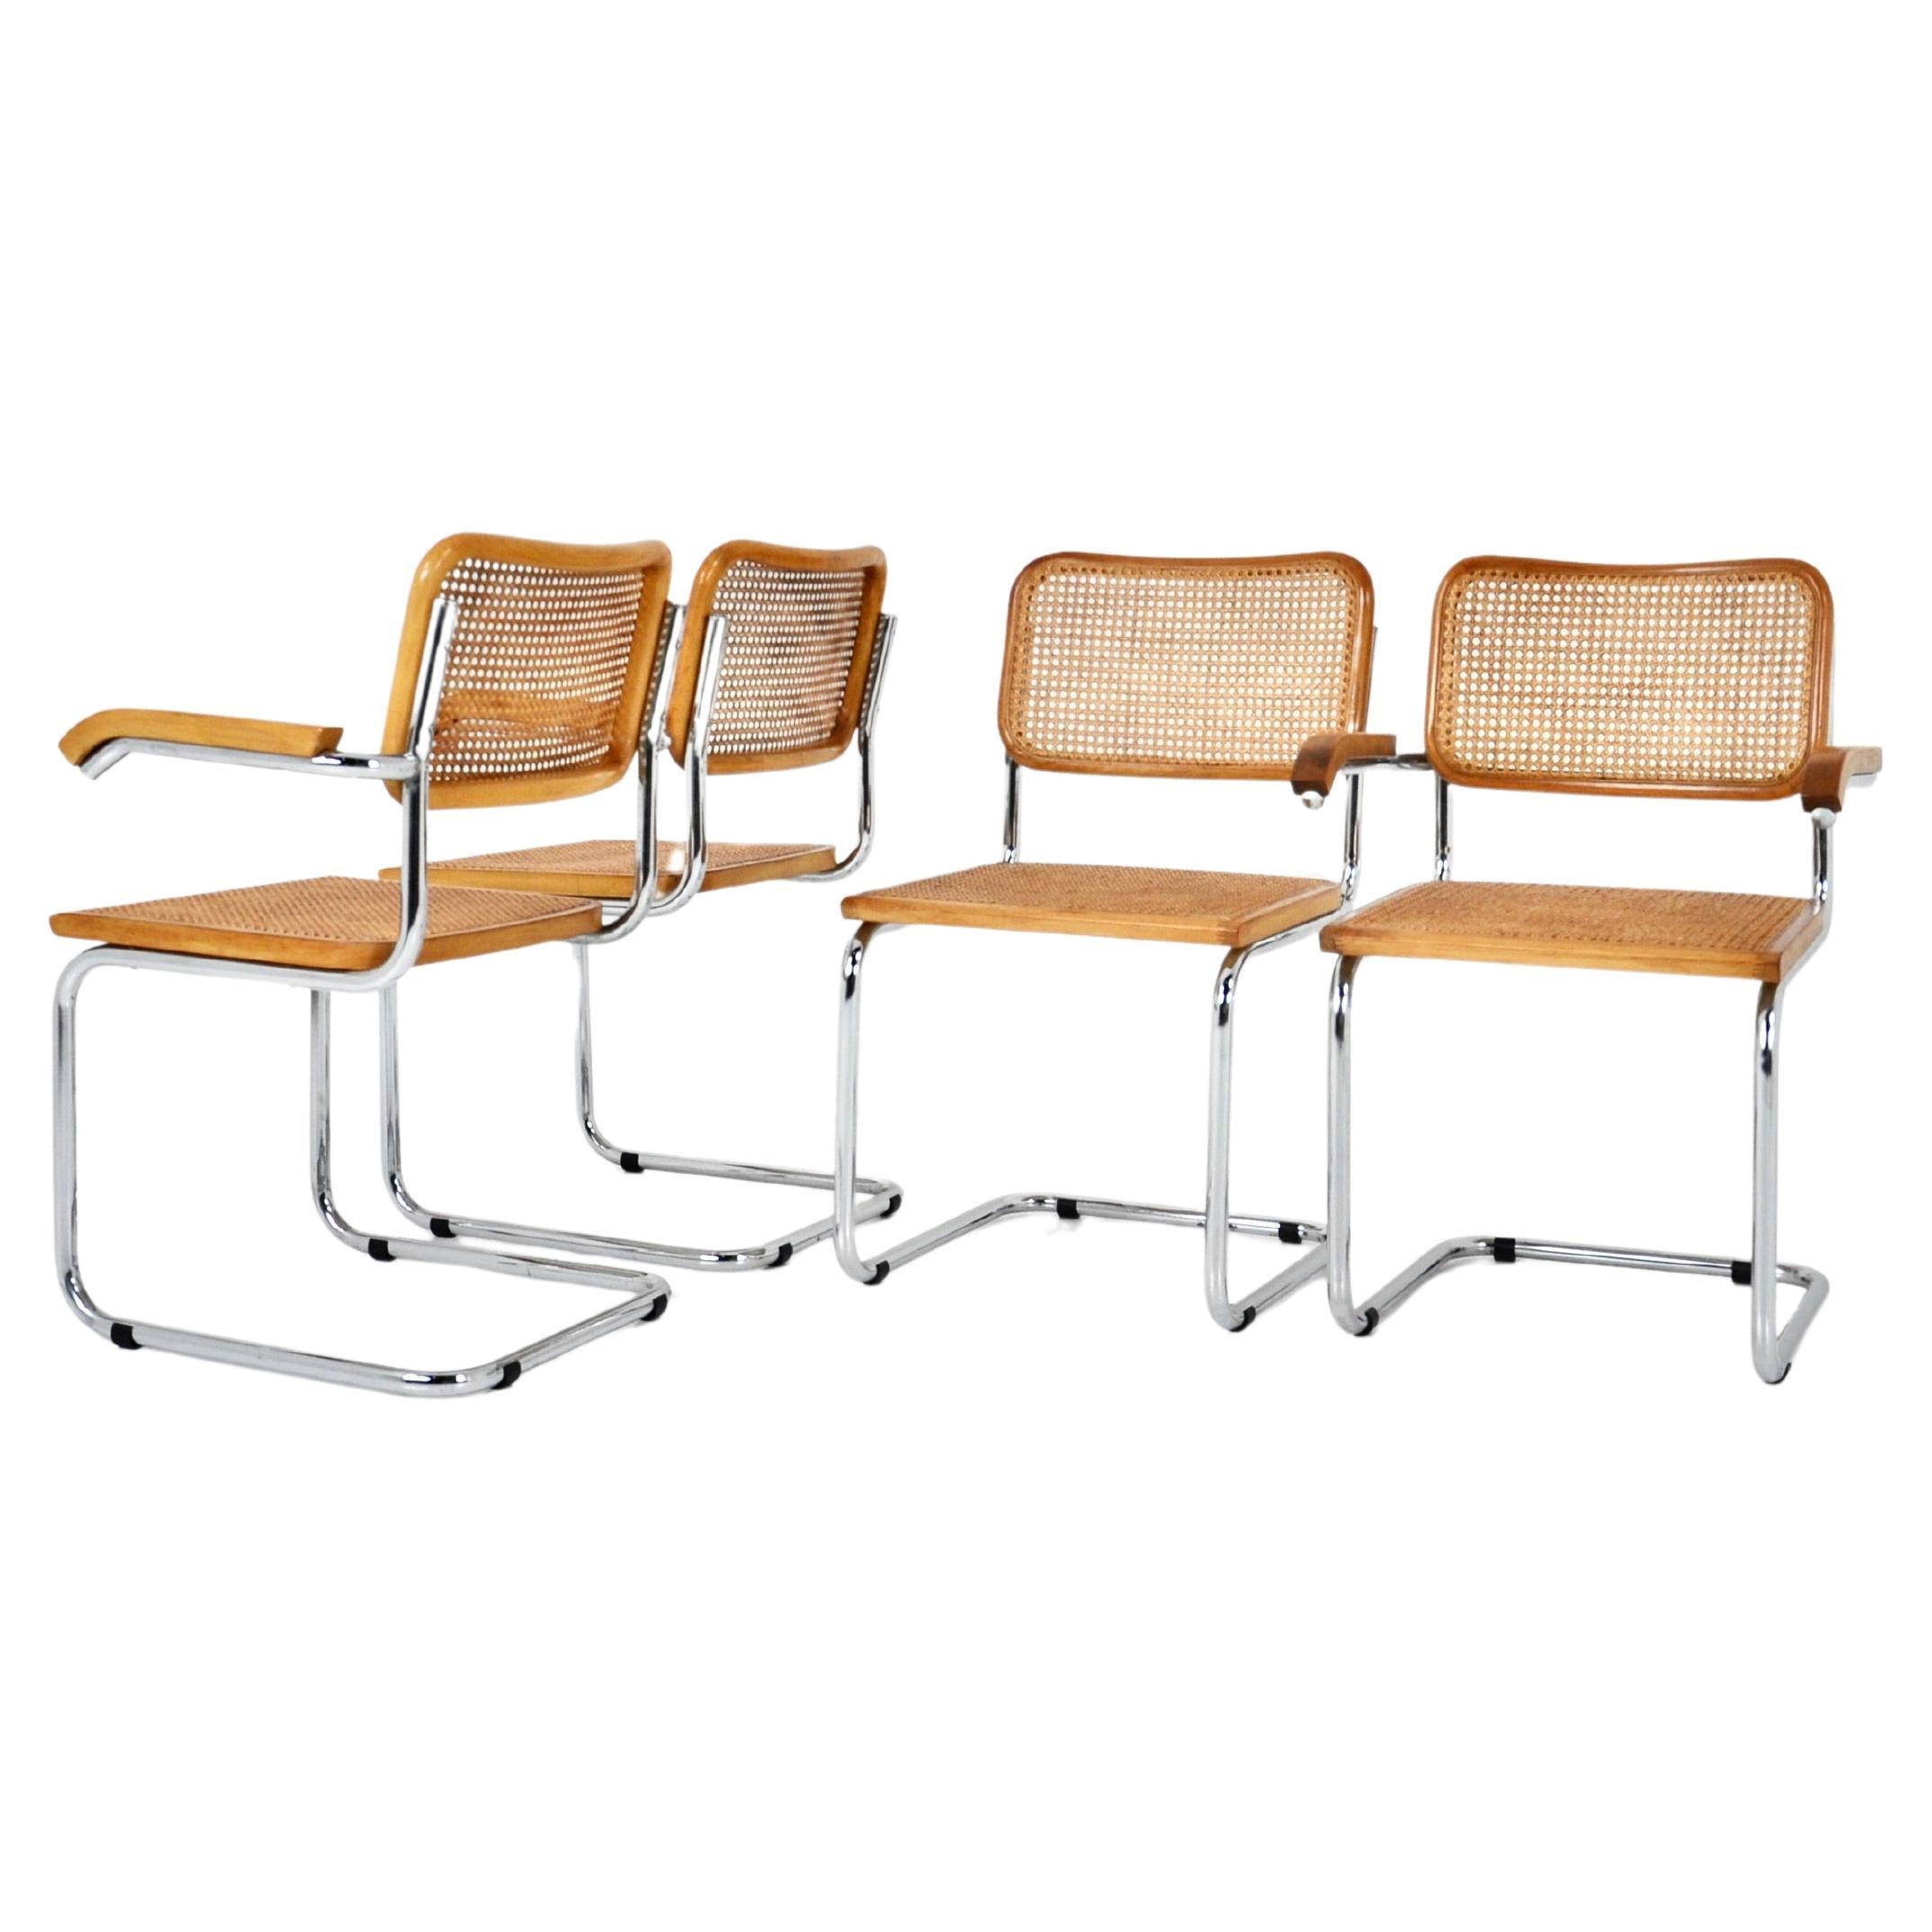 Dining Chairs Style B32 by Marcel Breuer Set of 4